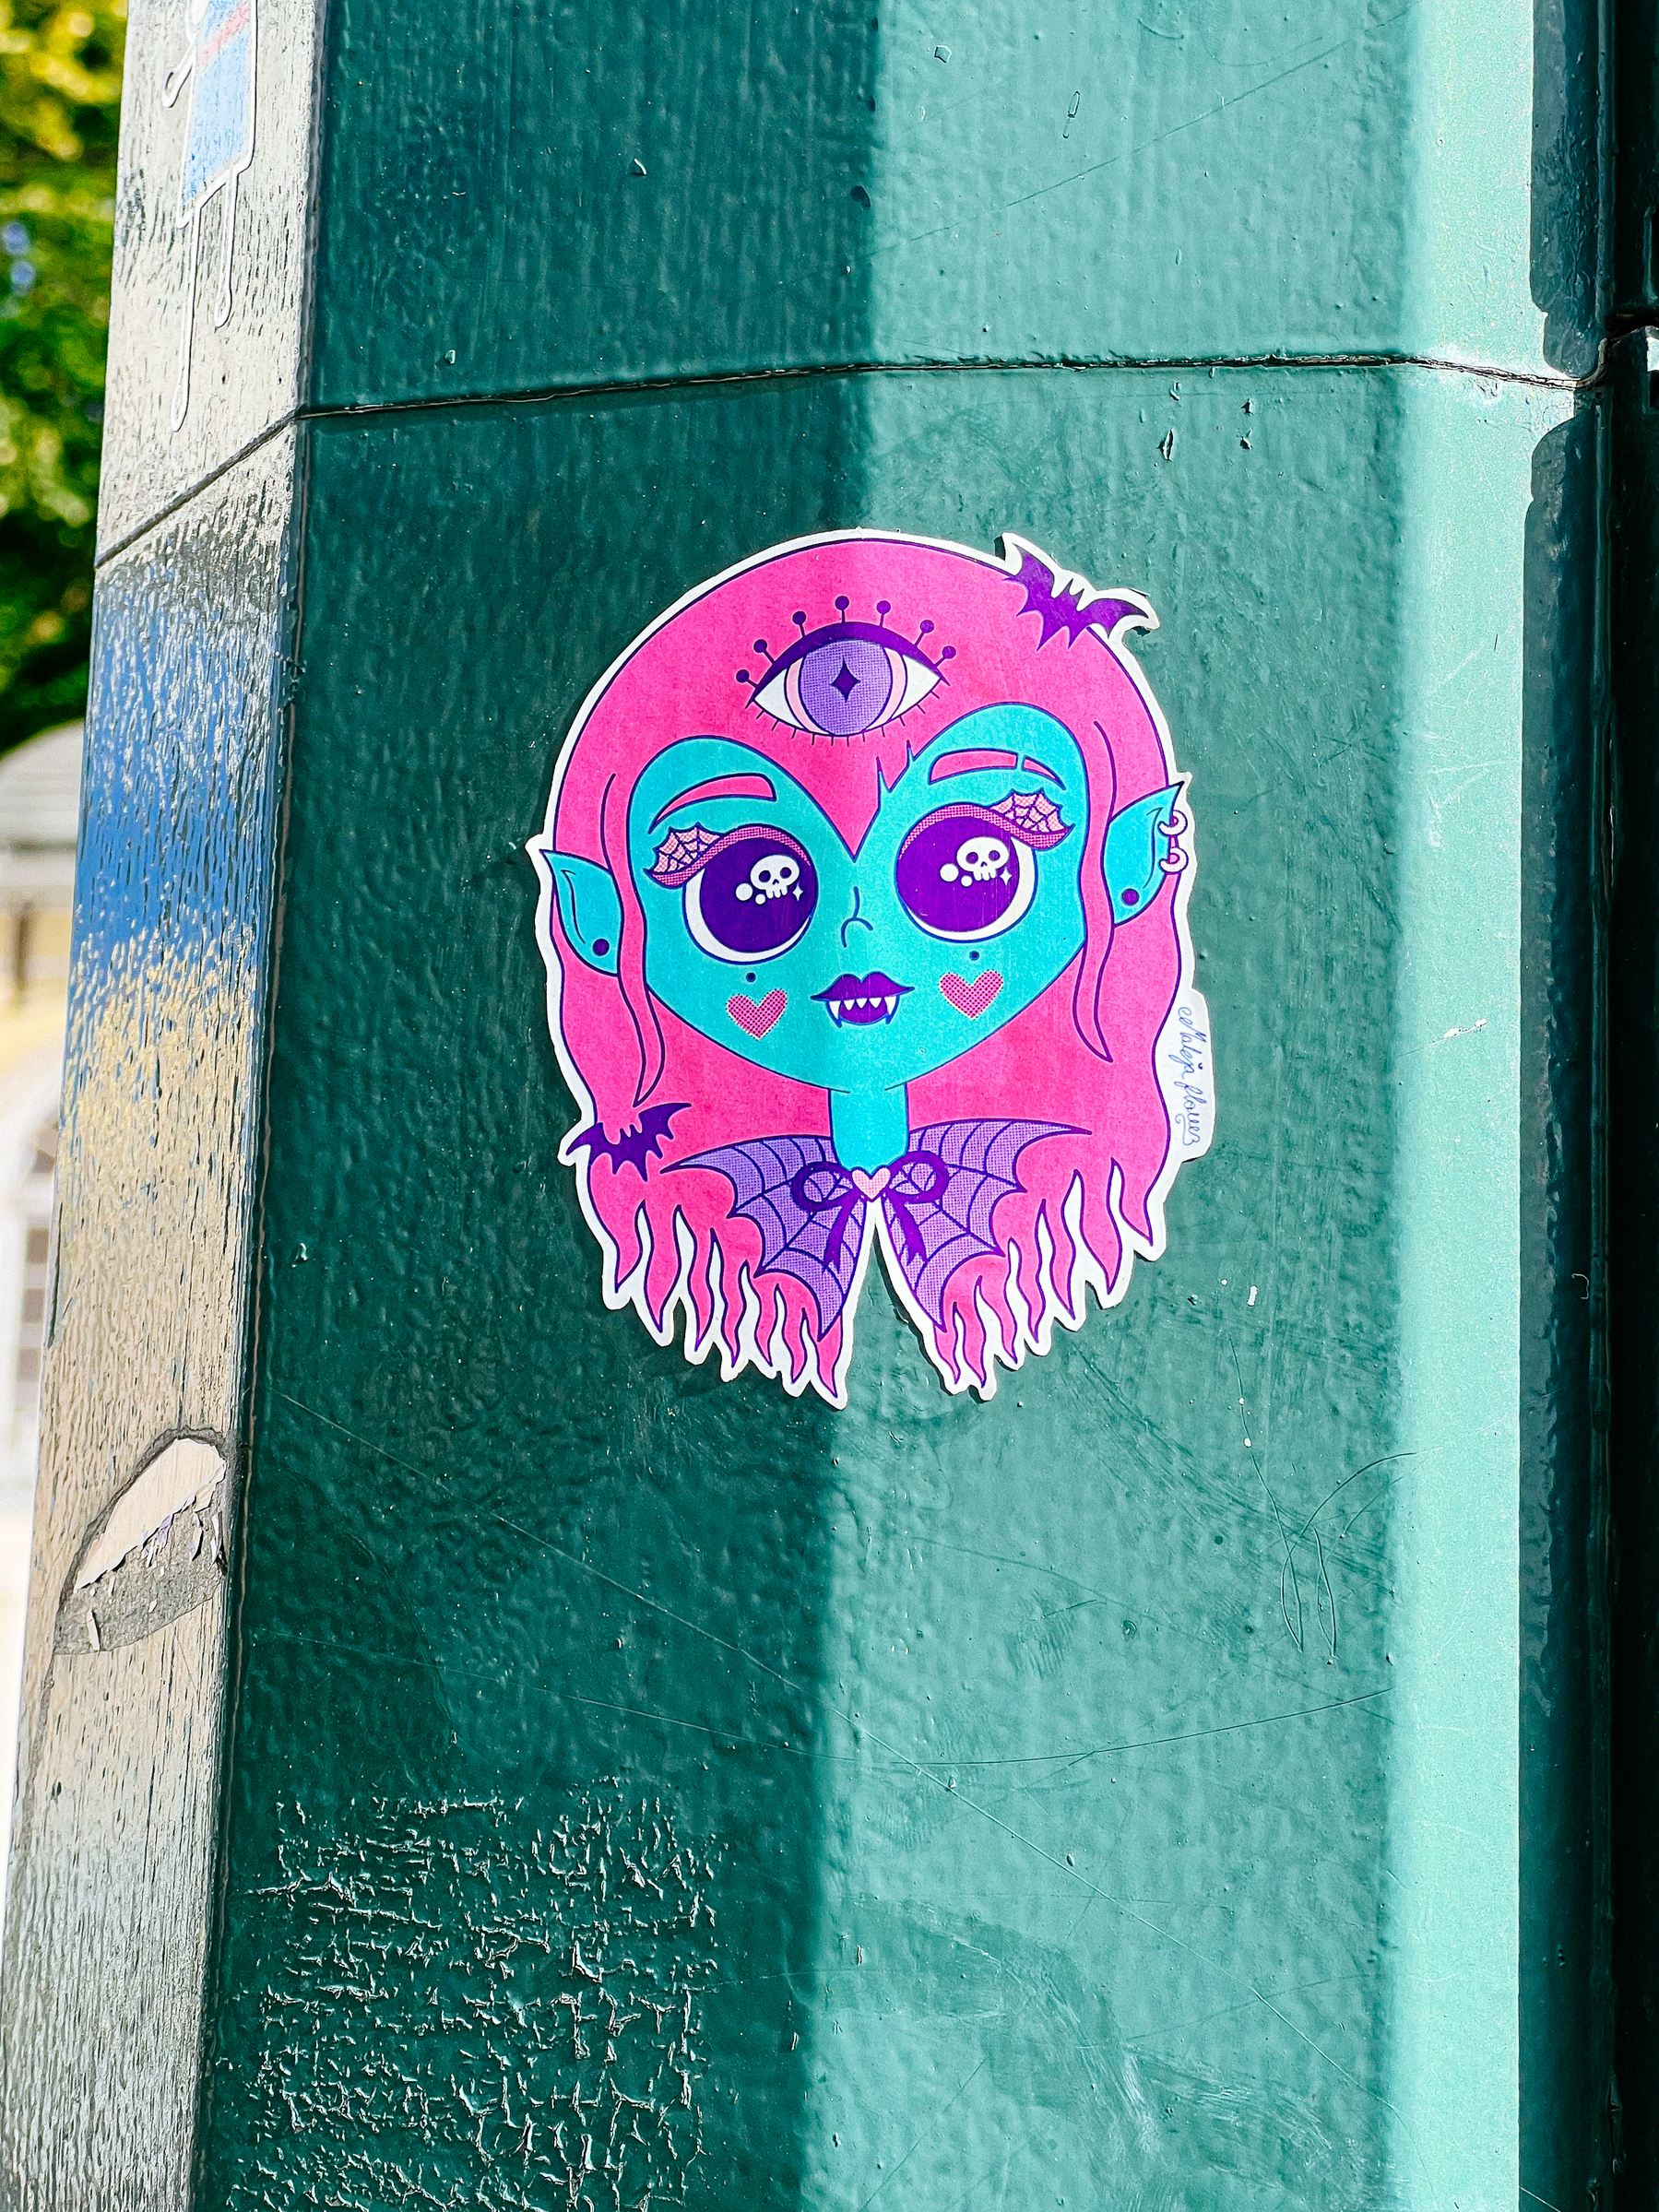 Long, pink, haired elf-like creature, with an extra eye on the forehead, fangs, bats on the hair, and ghosts on the eyes.  Hearts on the cheeks, and spider web sprinkled all over. A sticker.